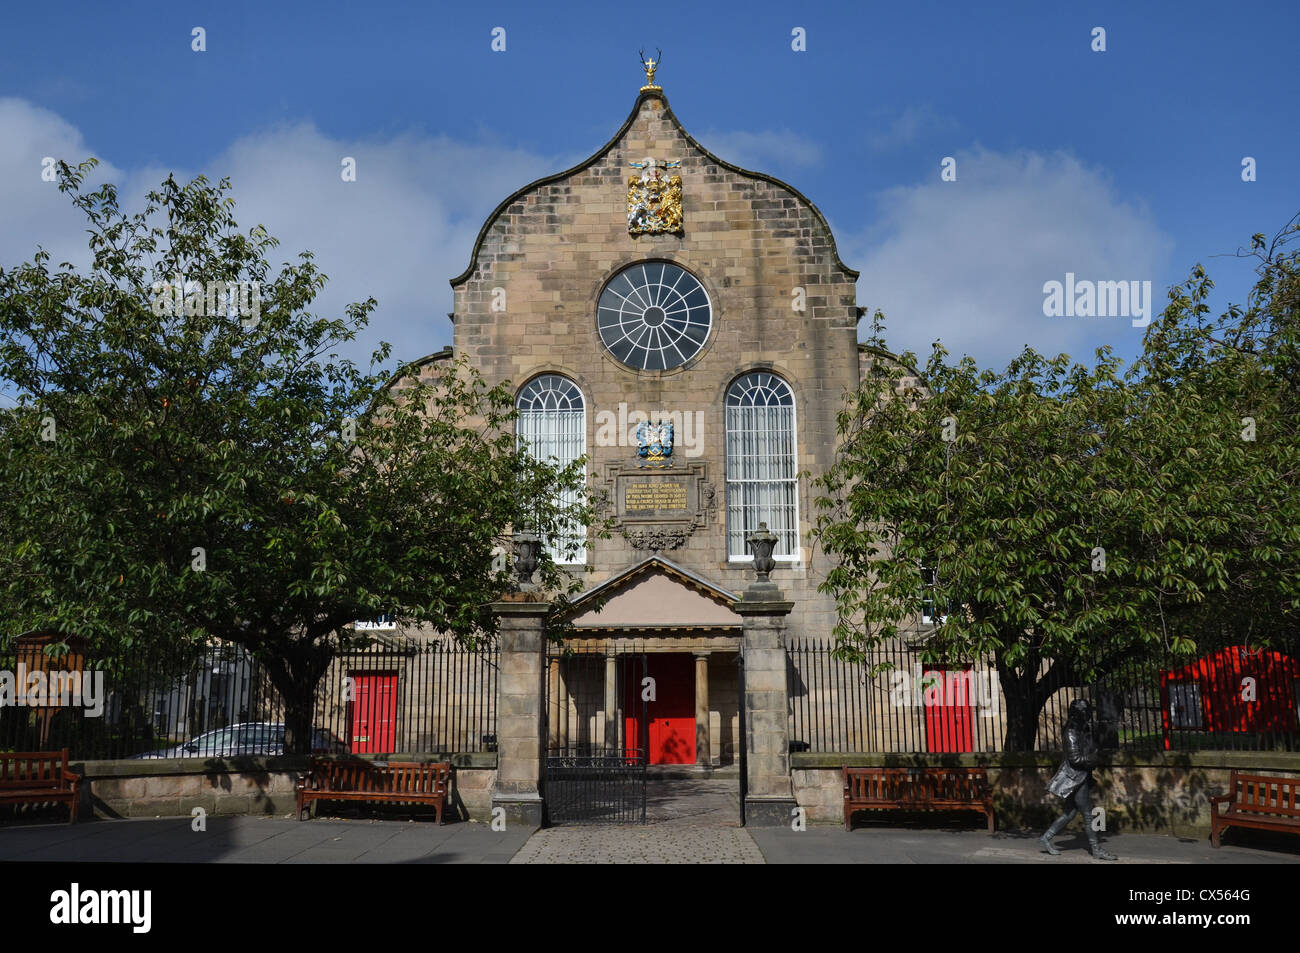 The front entrance to the 17th century Canongate Kirk on Edinburgh's Royal Mile. Stock Photo